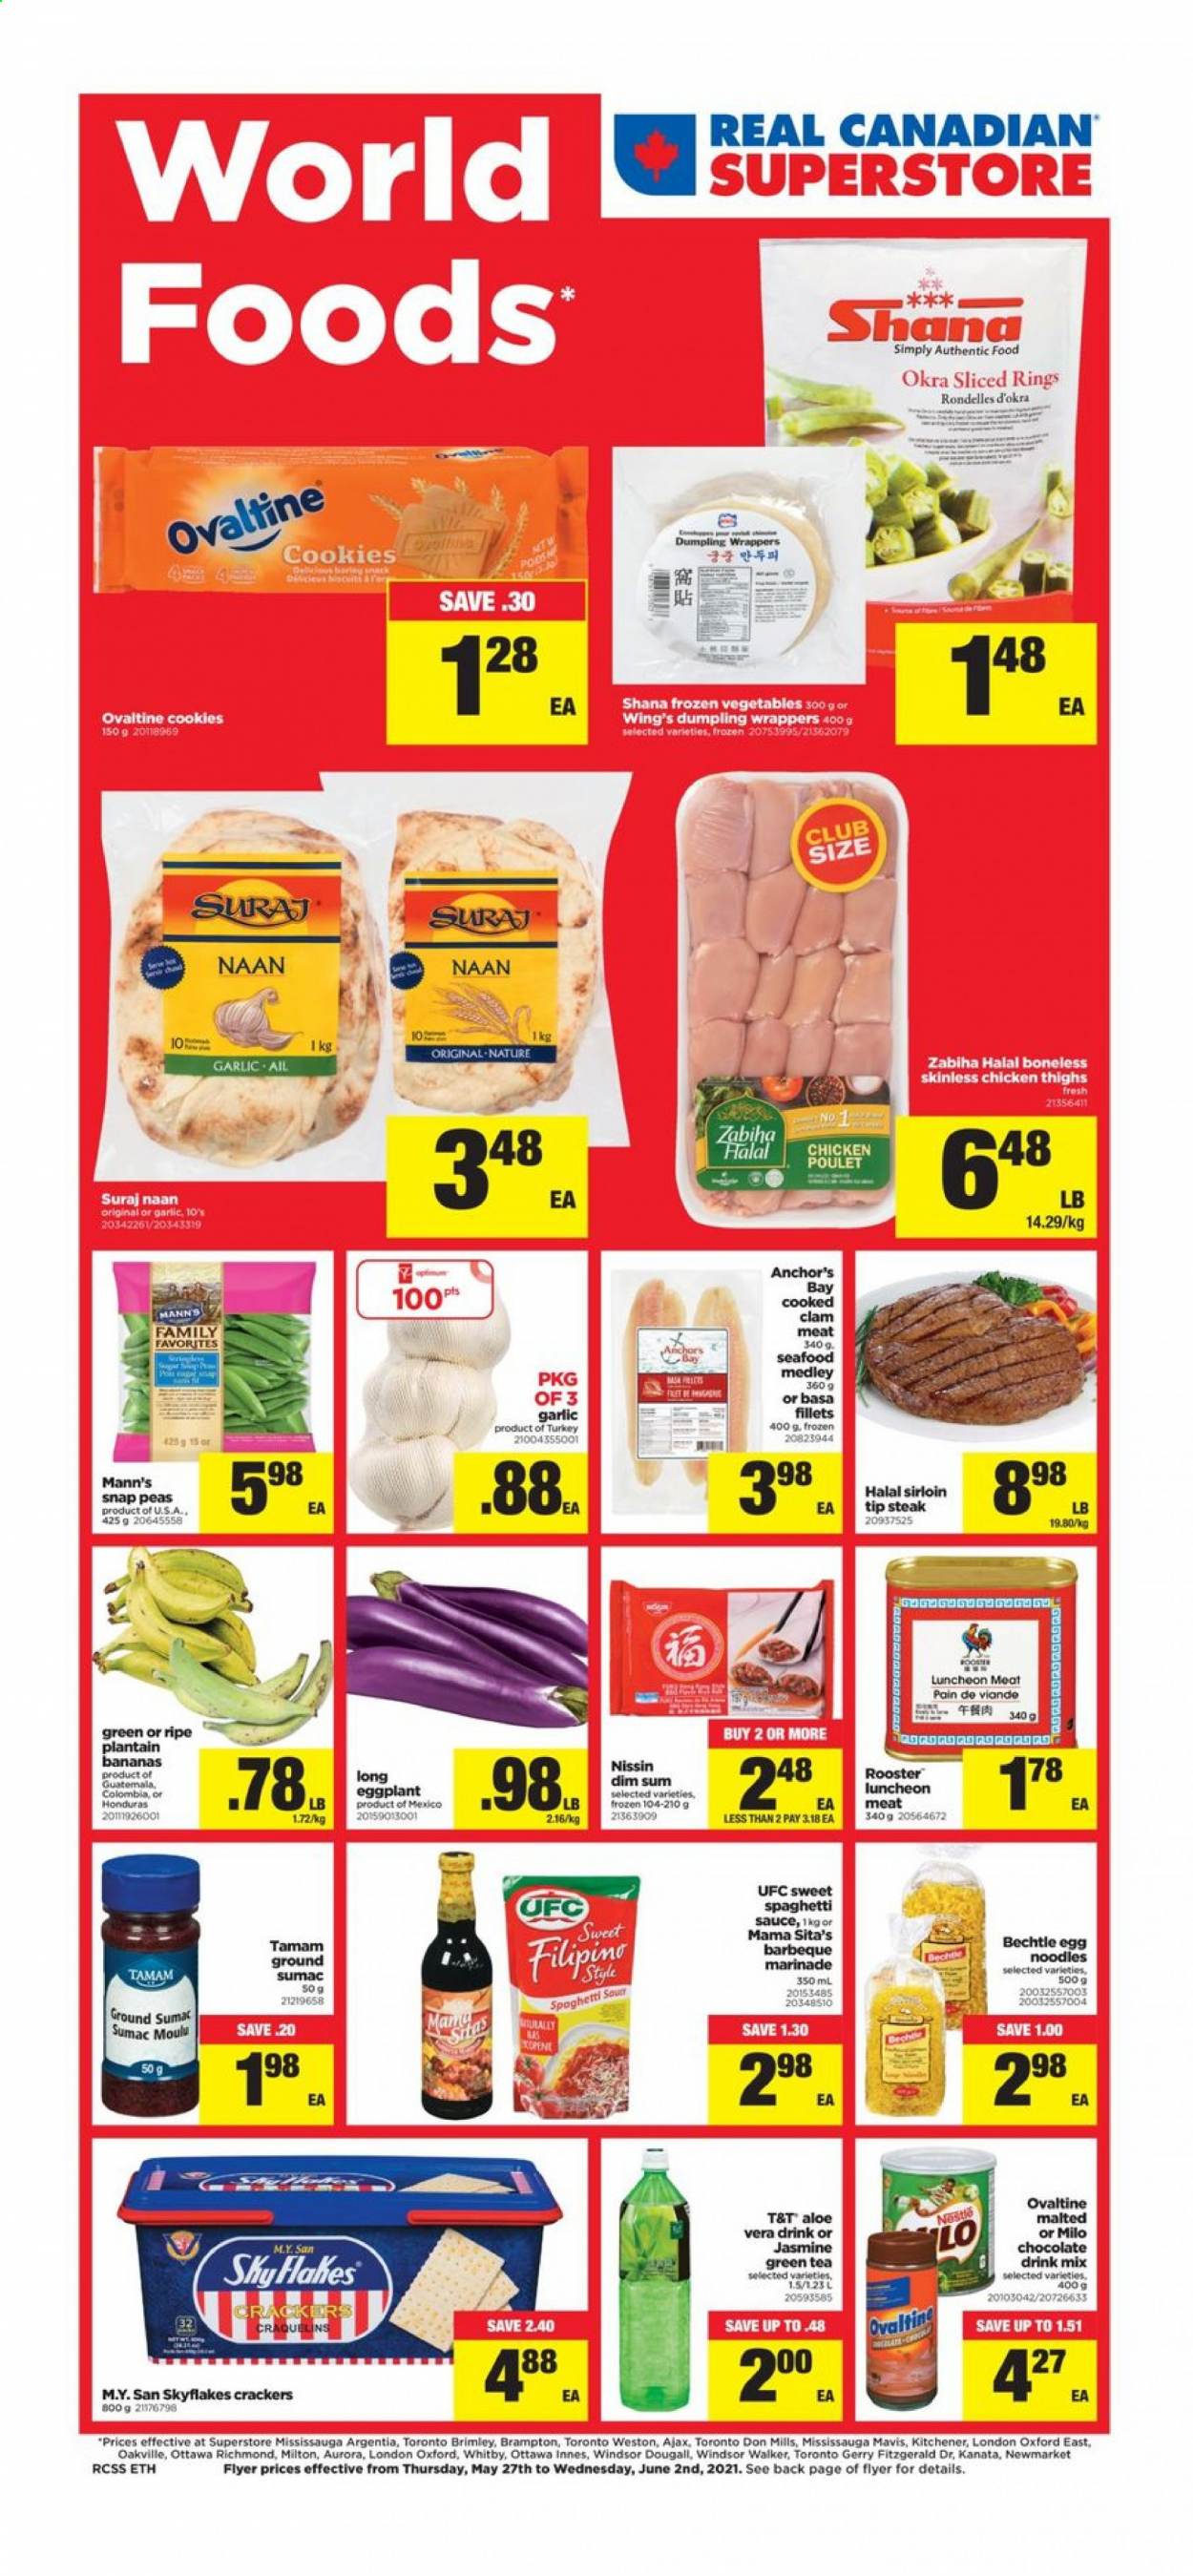 thumbnail - Real Canadian Superstore Flyer - May 27, 2021 - June 02, 2021 - Sales products - garlic, peas, okra, eggplant, bananas, clams, seafood, spaghetti, dumplings, noodles, Nissin, spaghetti sauce, lunch meat, Milo, Anchor, frozen vegetables, snap peas, cookies, chocolate, crackers, Skyflakes, egg noodles, marinade, chocolate drink, green tea, tea, chicken thighs, chicken, Ajax, Optimum, steak. Page 1.